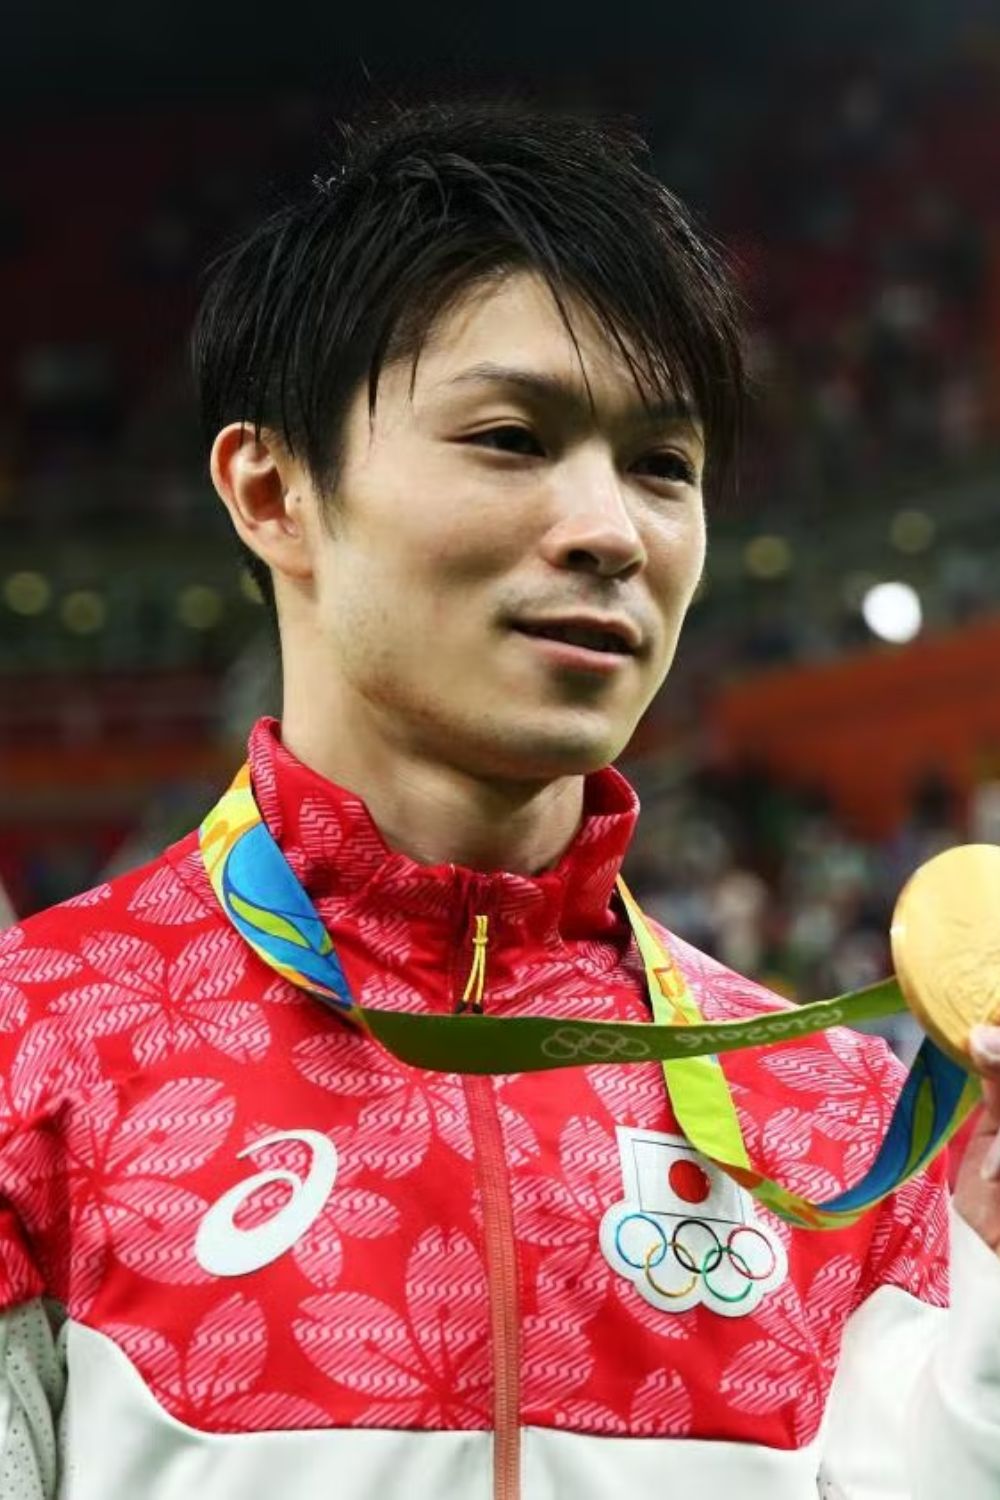 Kōhei Uchimura Is A Seven-Time Olympic Medalist 